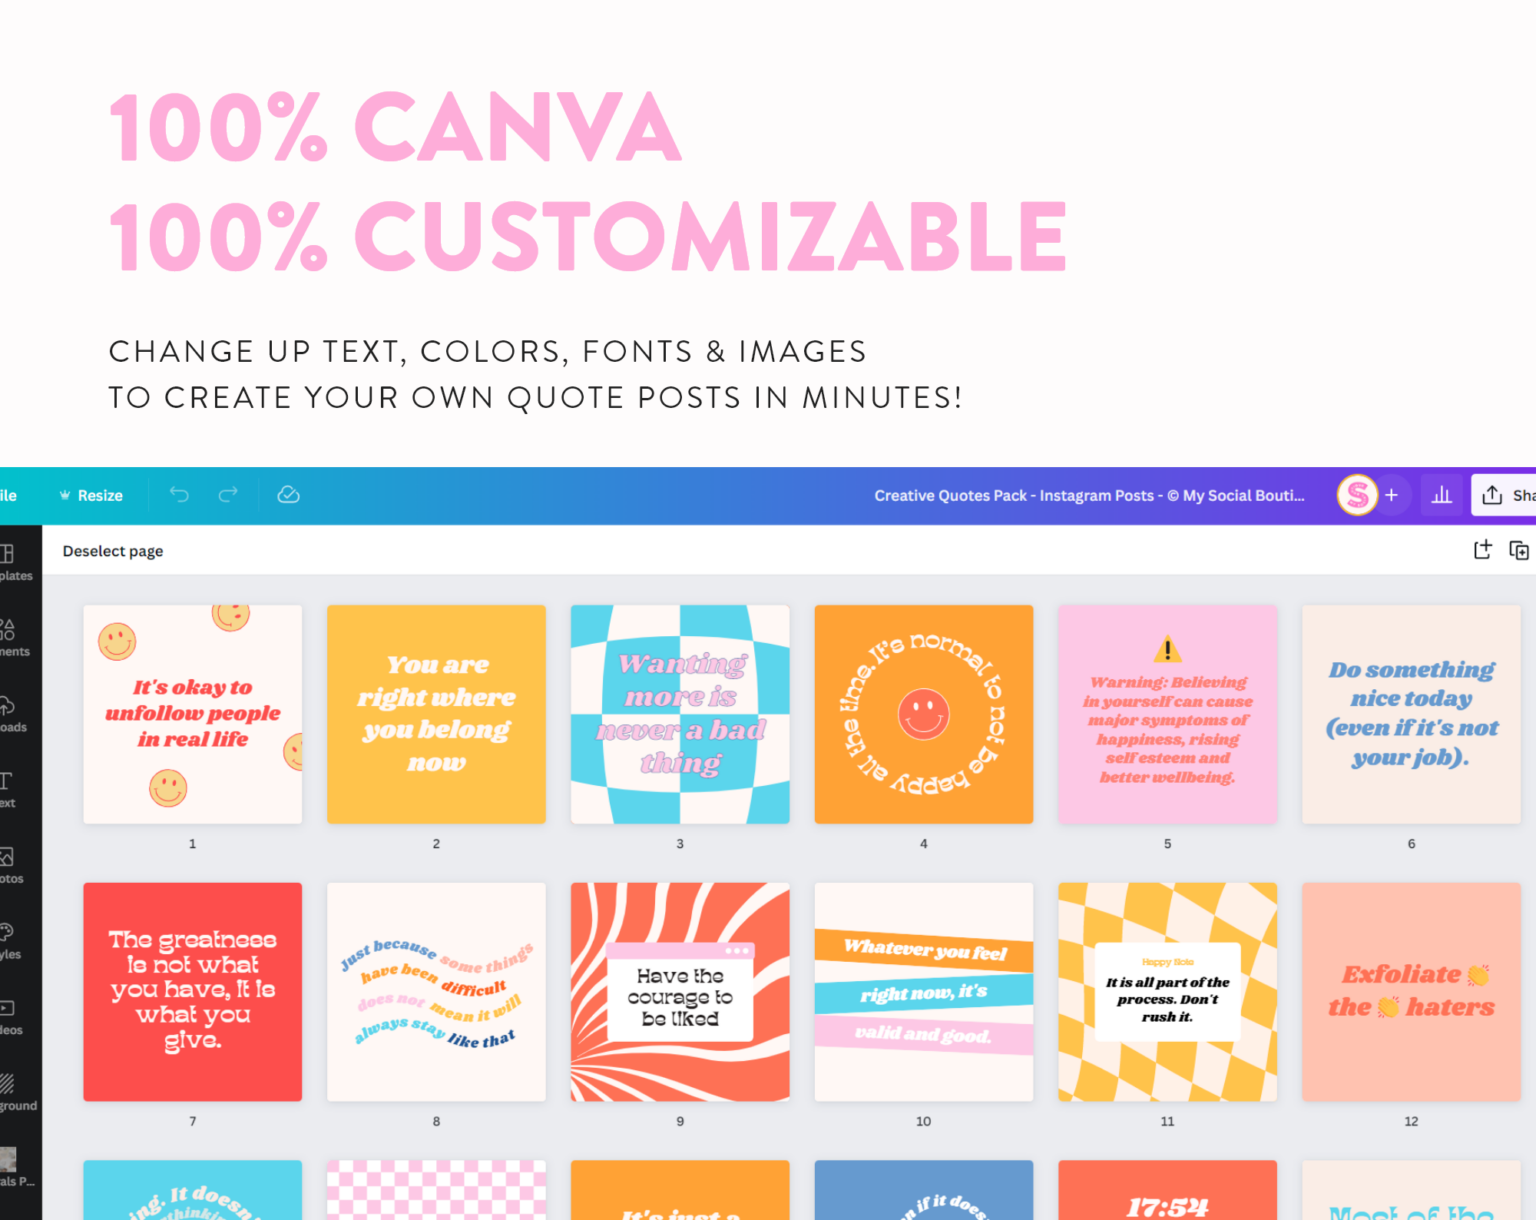 creative-quotes-for-instagram-template-pack-canva-customizable-6